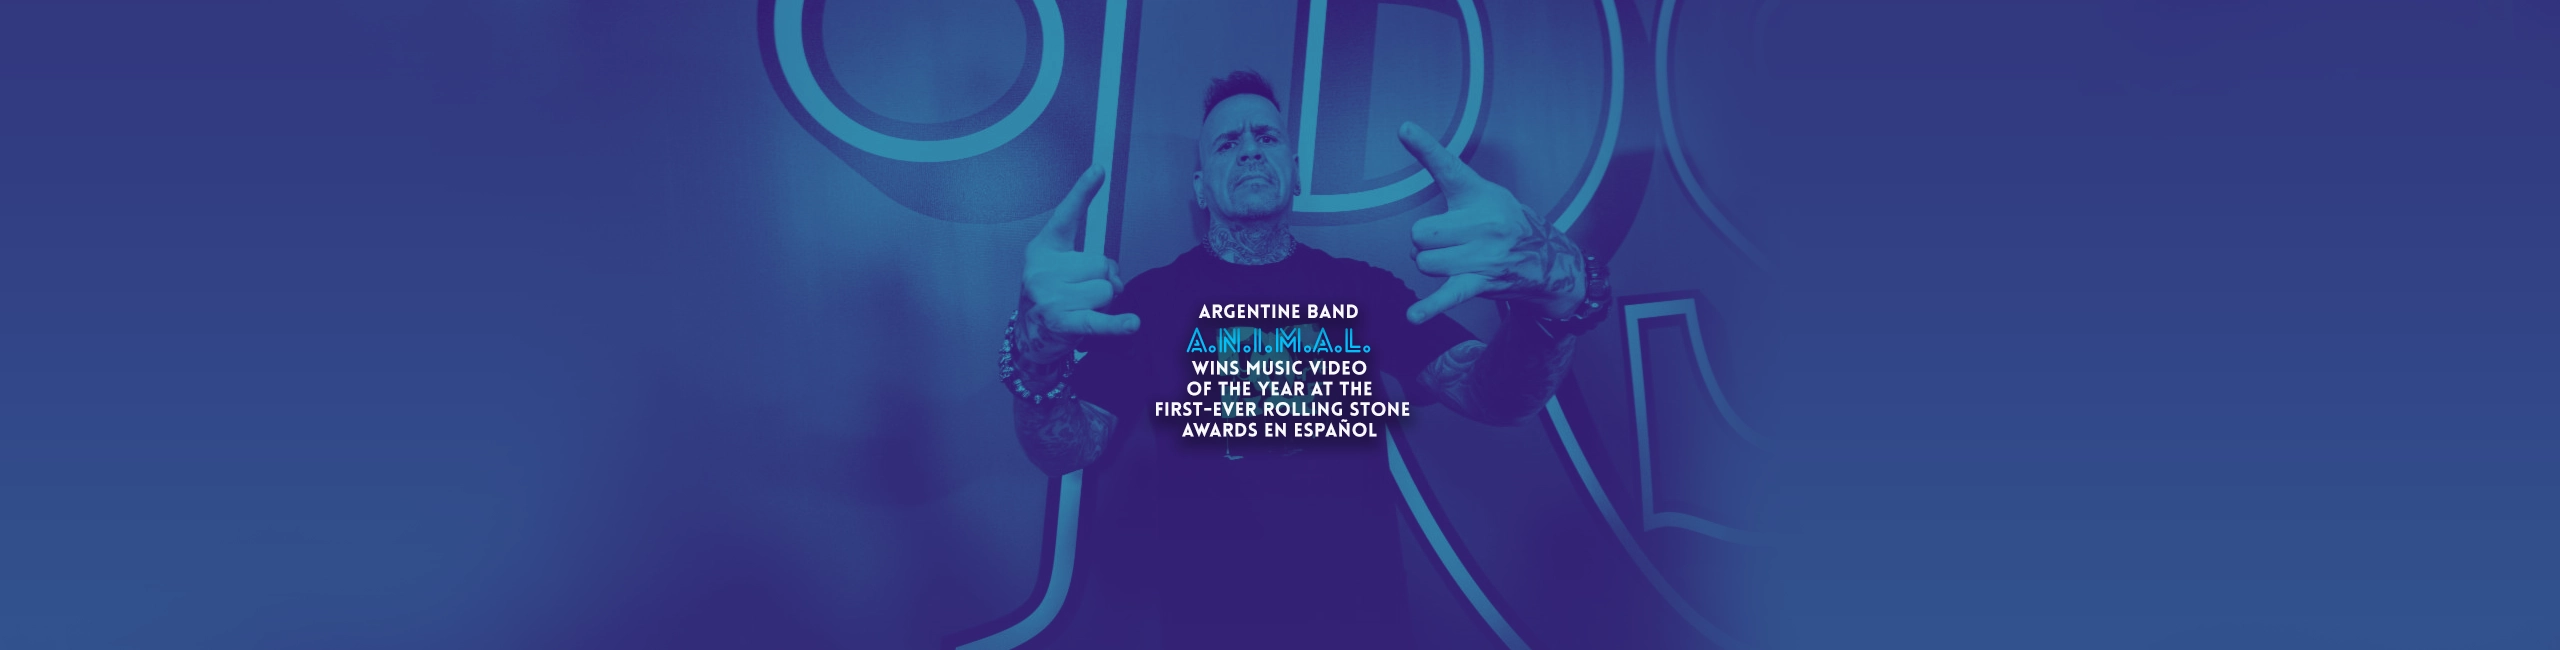 Argentine band A.N.I.M.A.L. wins music video of the year at the first-ever Rolling Stone Awards en español.